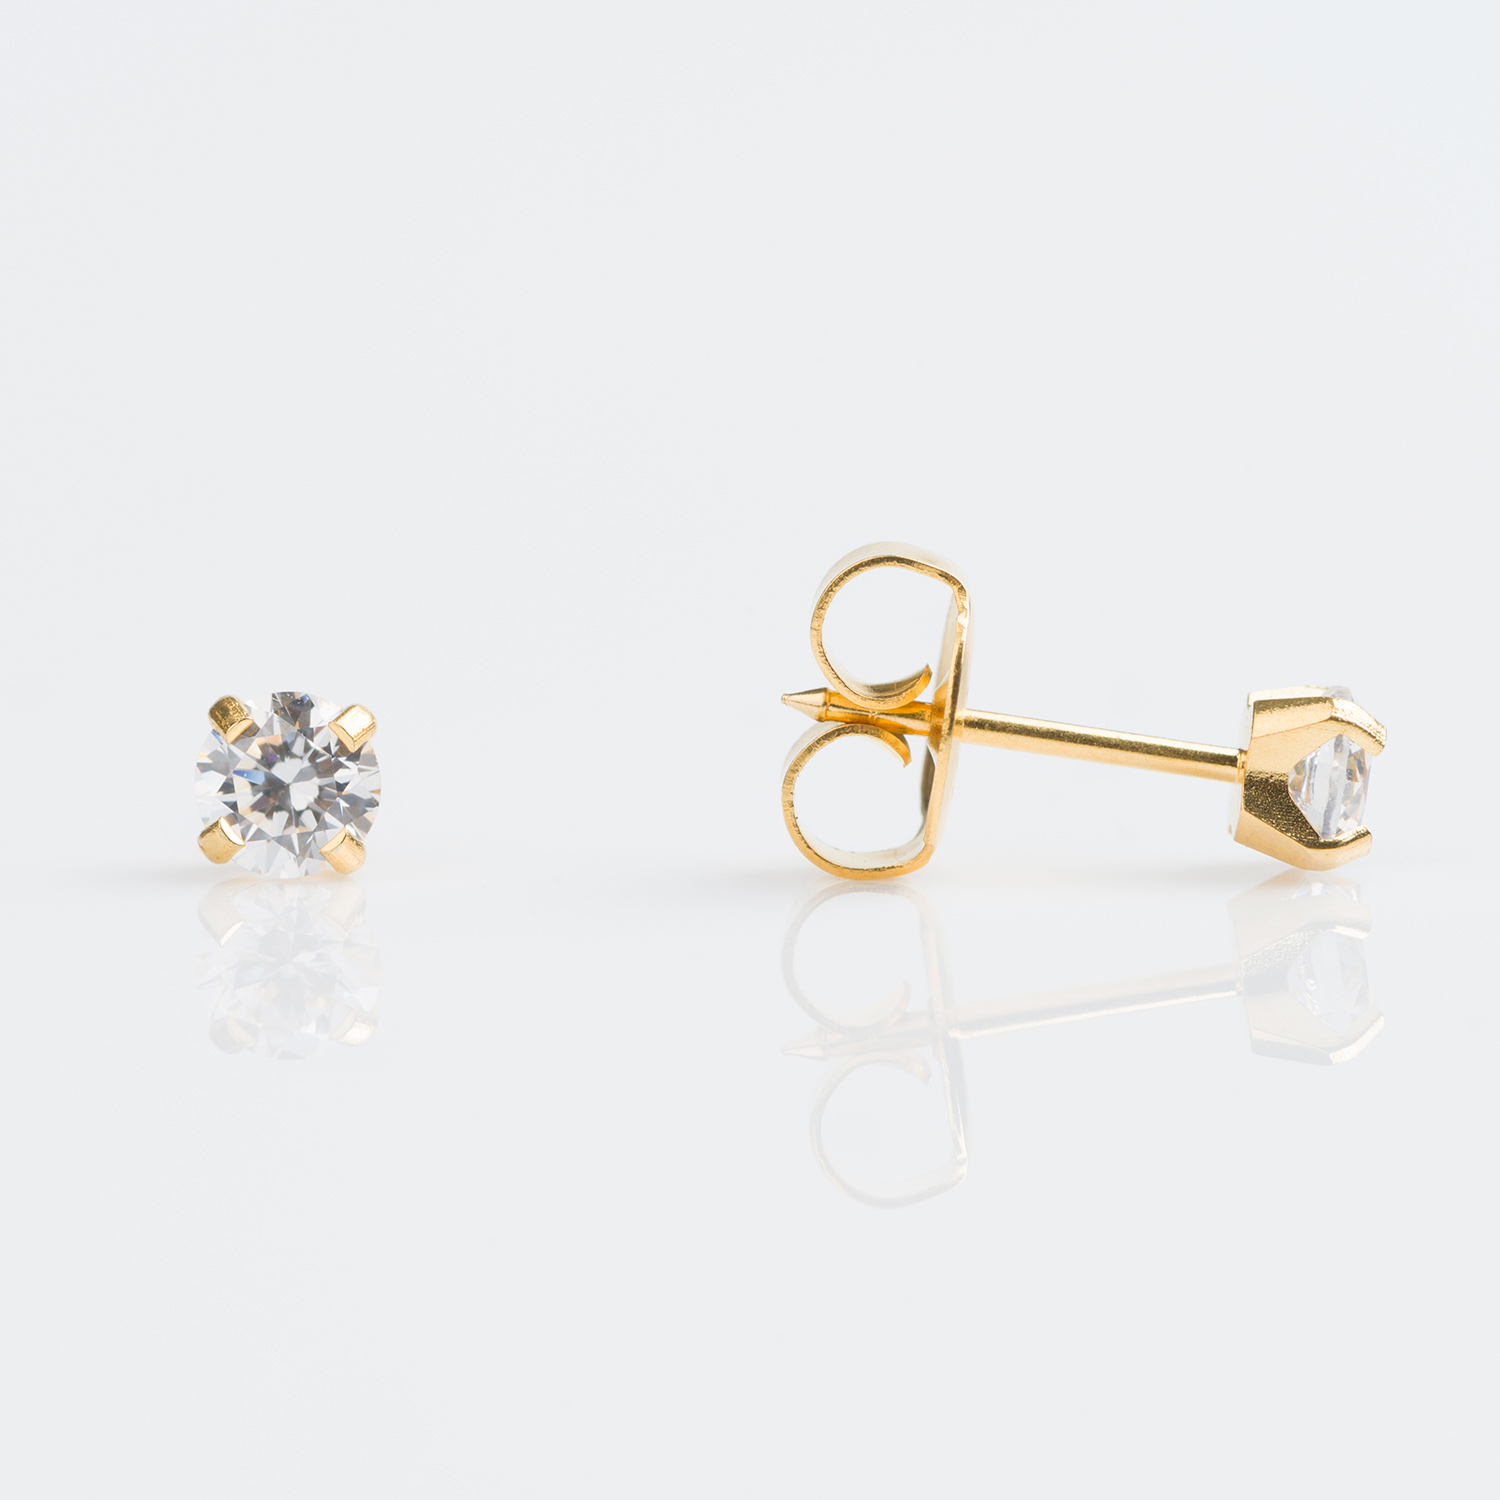 S742STX – Studex Sensitive Gold Plated Tiff. 4mm Cubic Zirconia Earrings